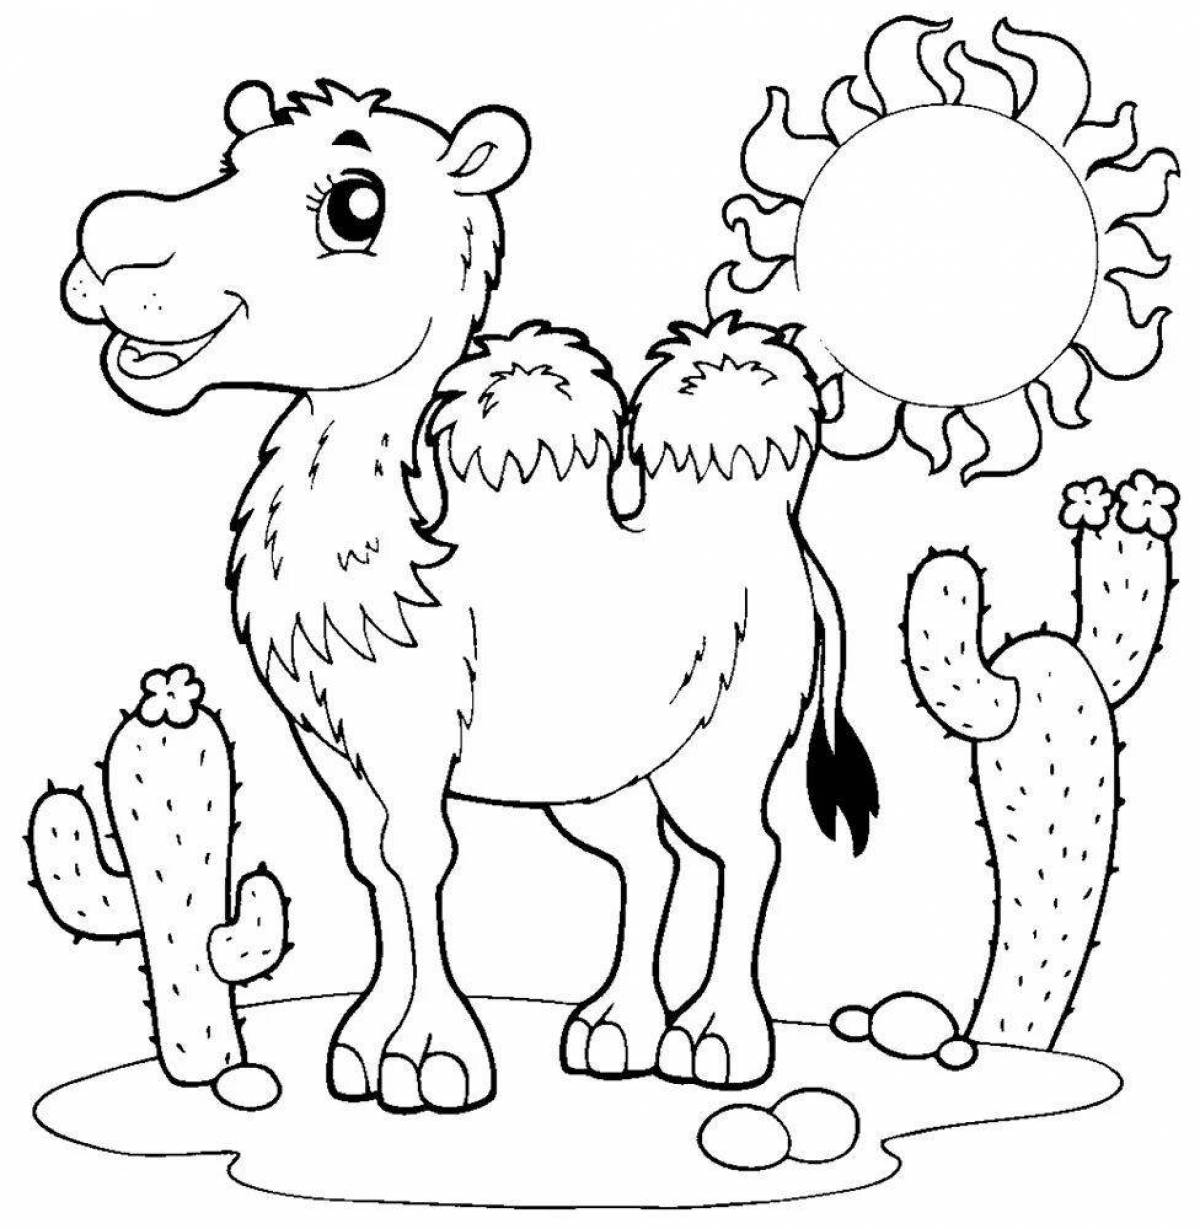 Coloring cute camel for children 6-7 years old